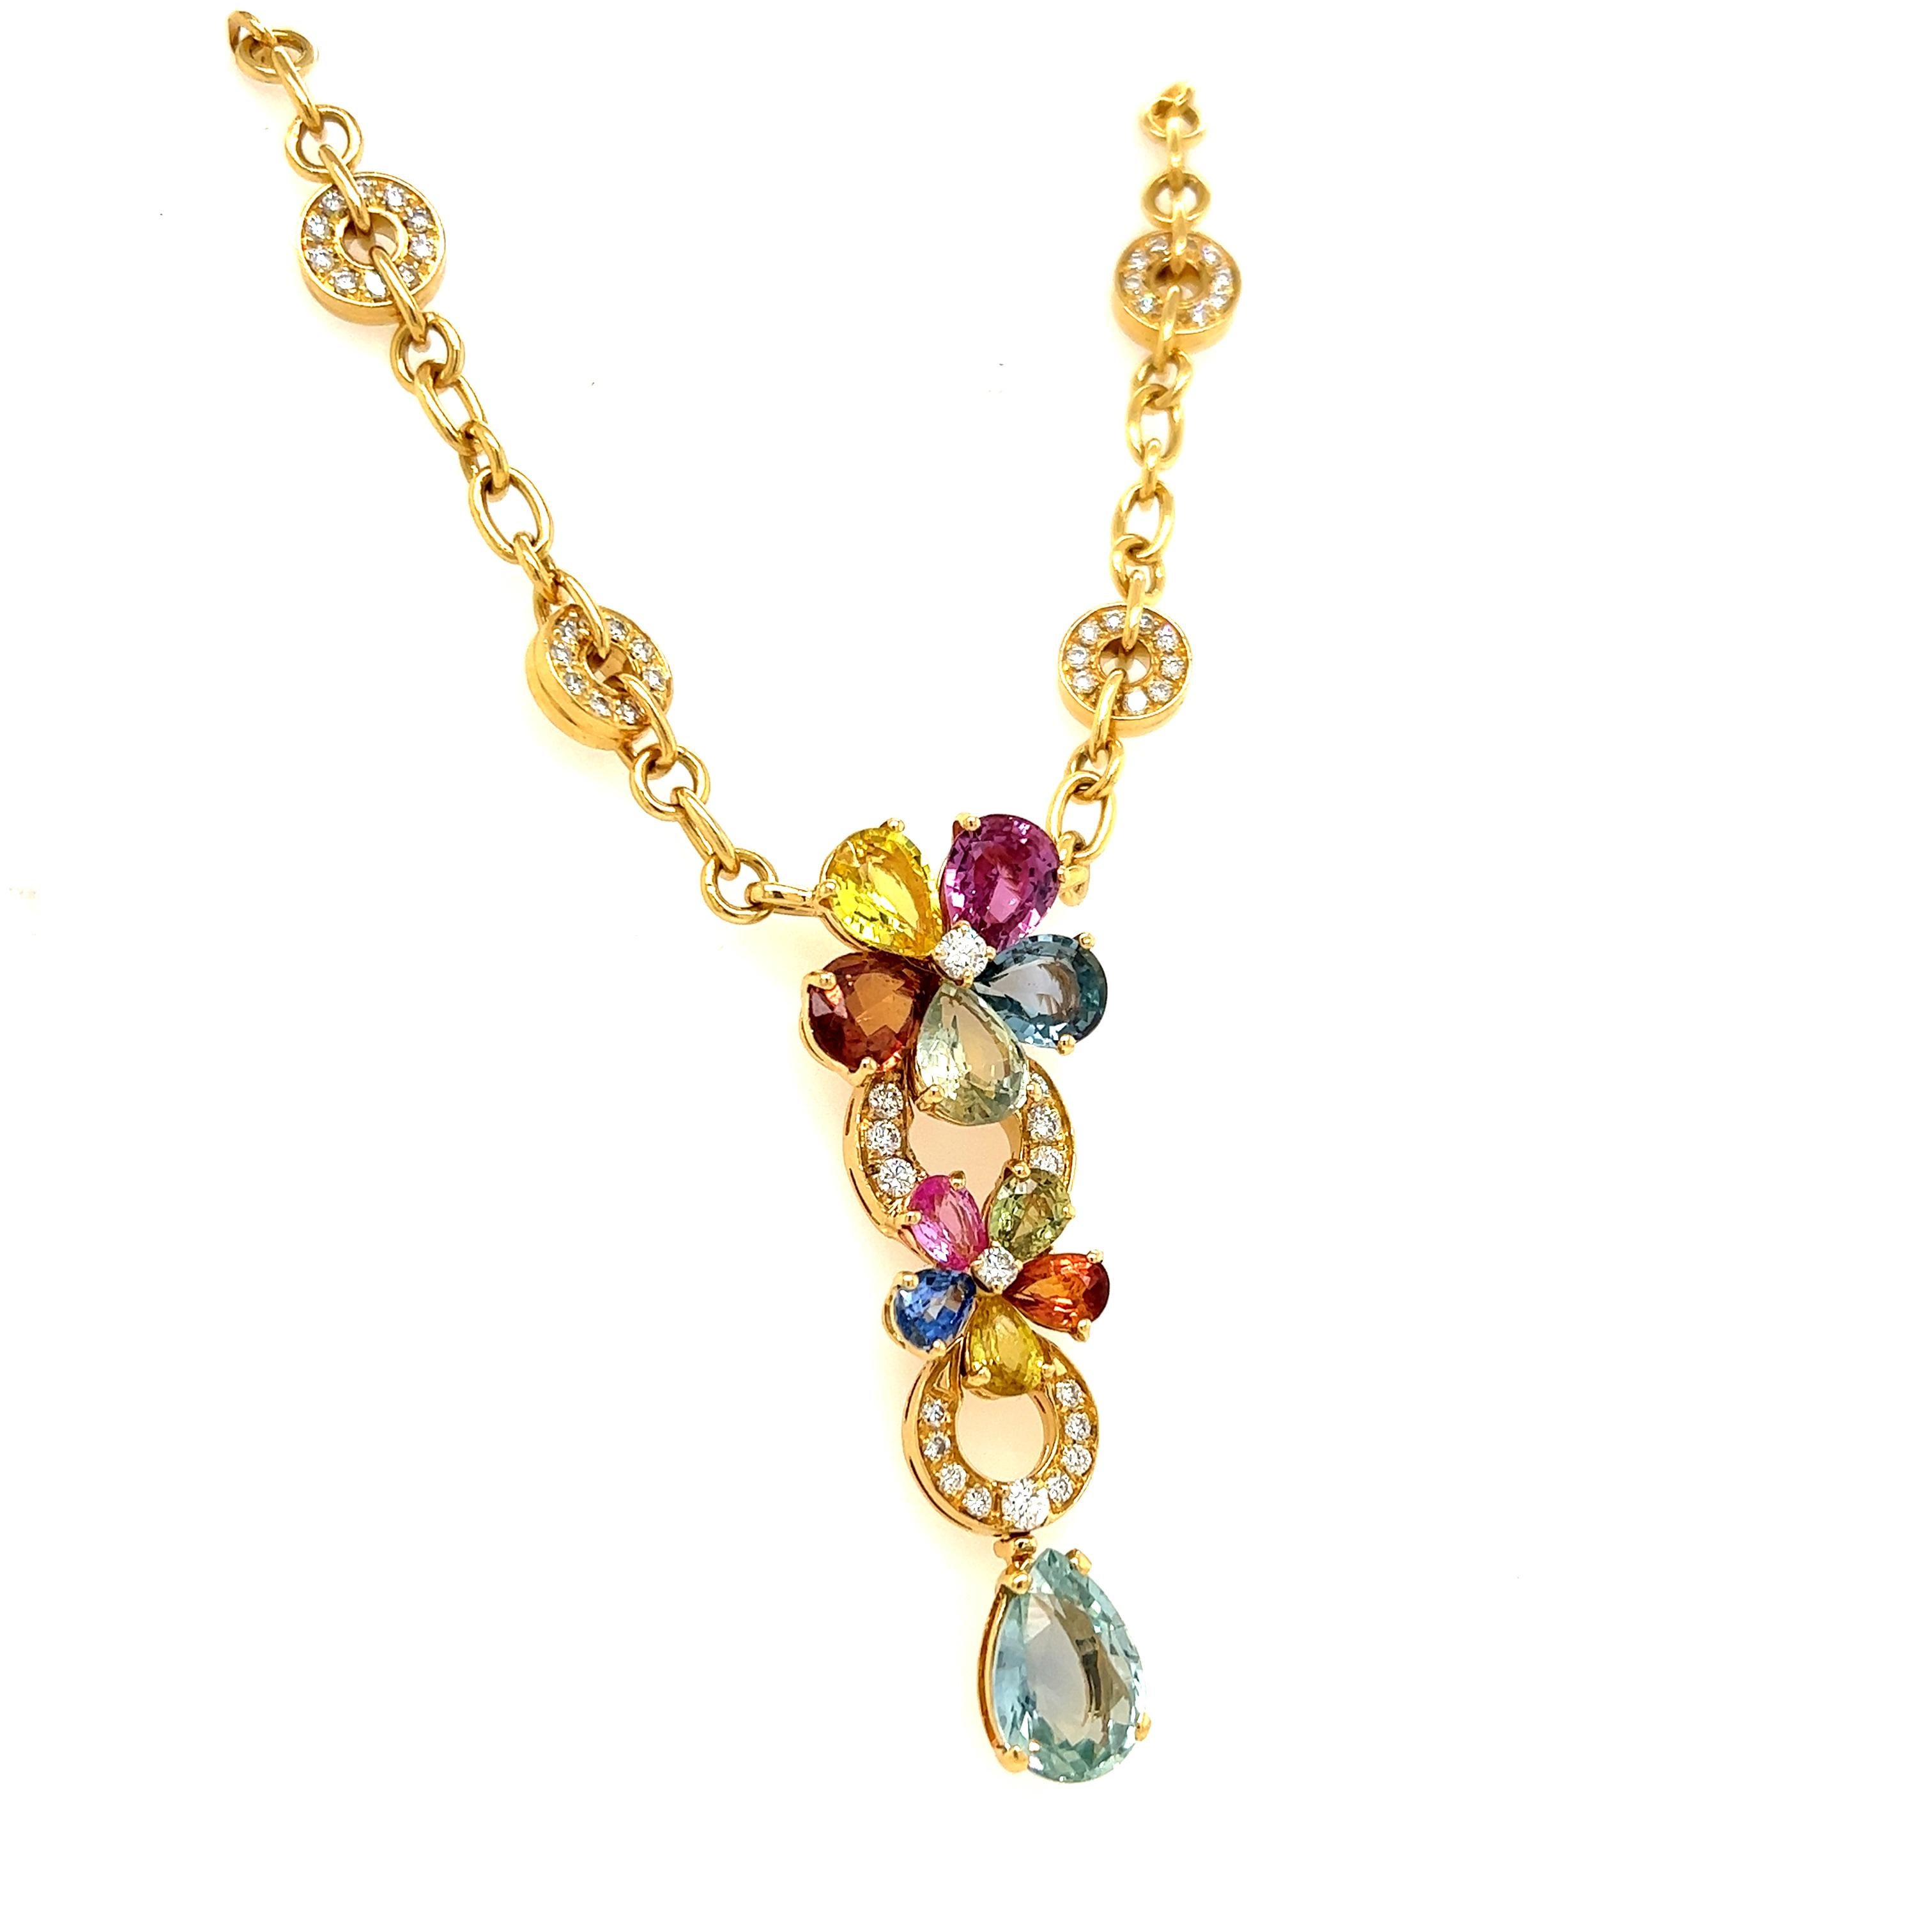 Beautiful creation from famed jewelry house Bvlgari. This elegant necklace is crafted in 18k yellow gold set with natural diamonds and natural sapphires and is a creation from the Sapphire Flower collection by Bvlgari. 
The necklace features two